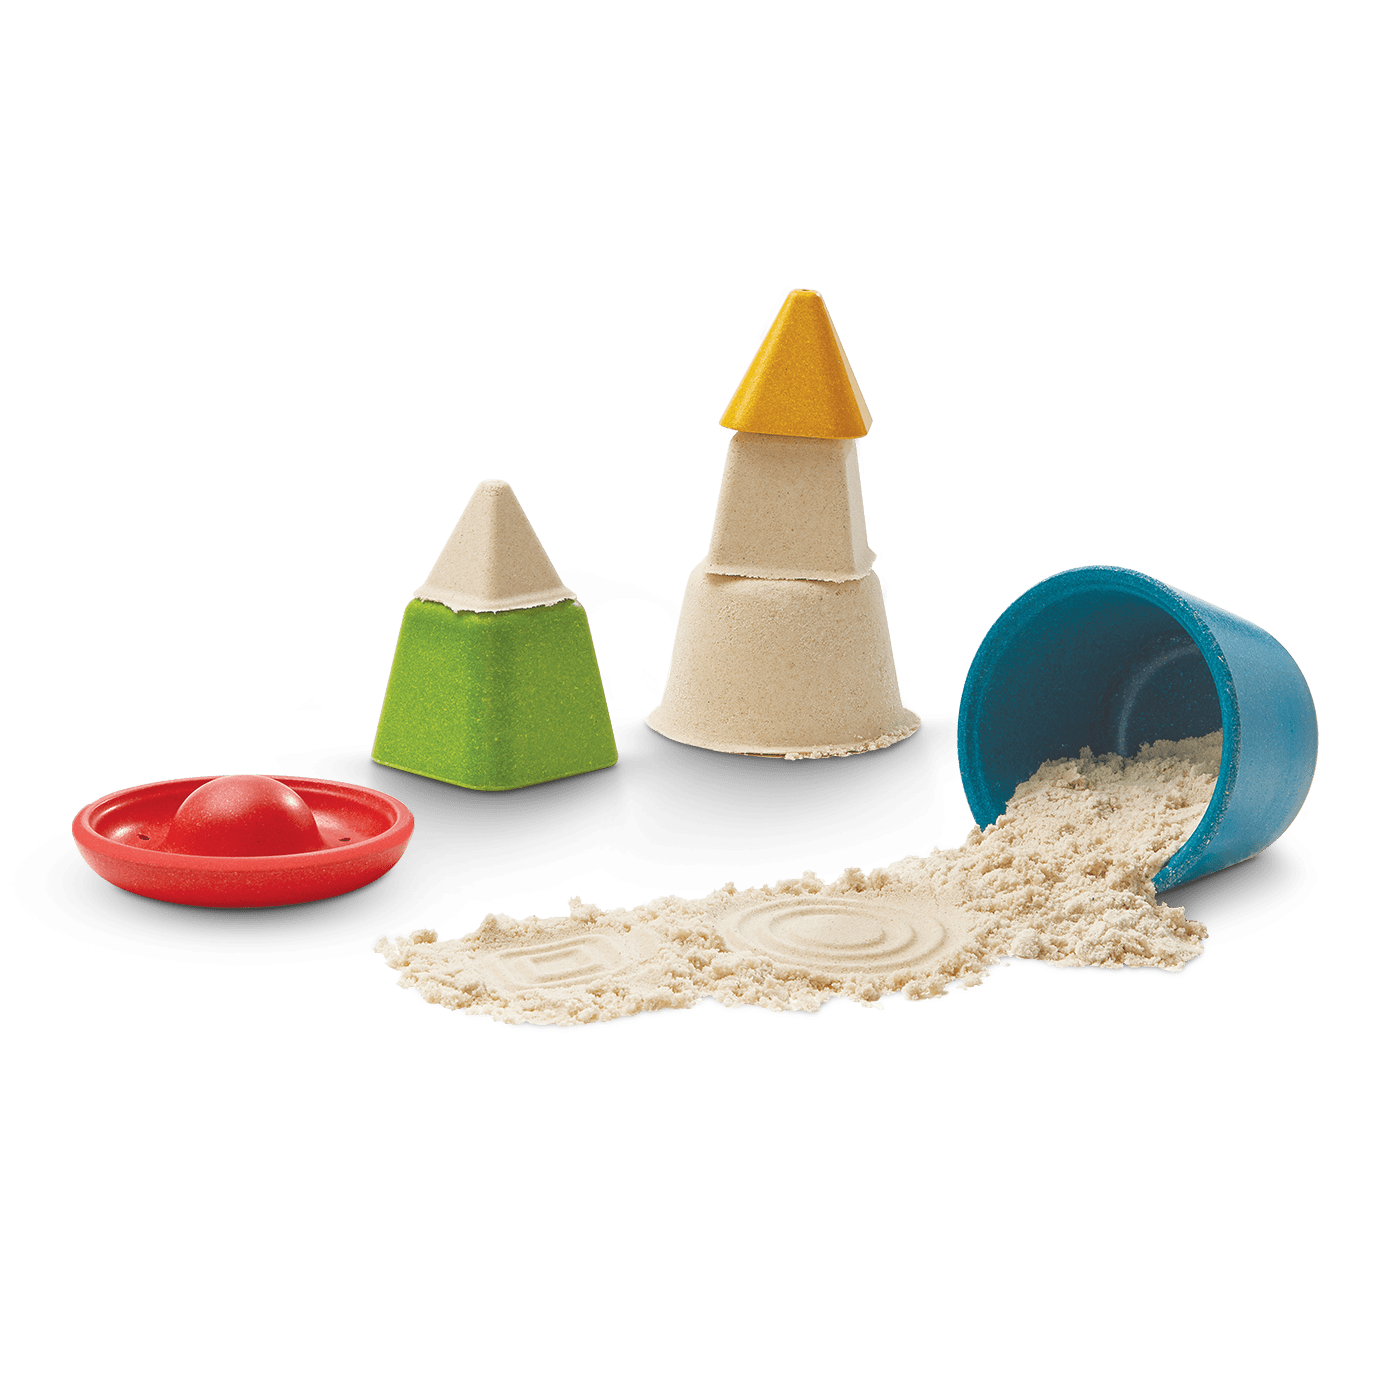 Sustainably Made "Planwood" Ages 3+ Tableware Set by Plan Toys 